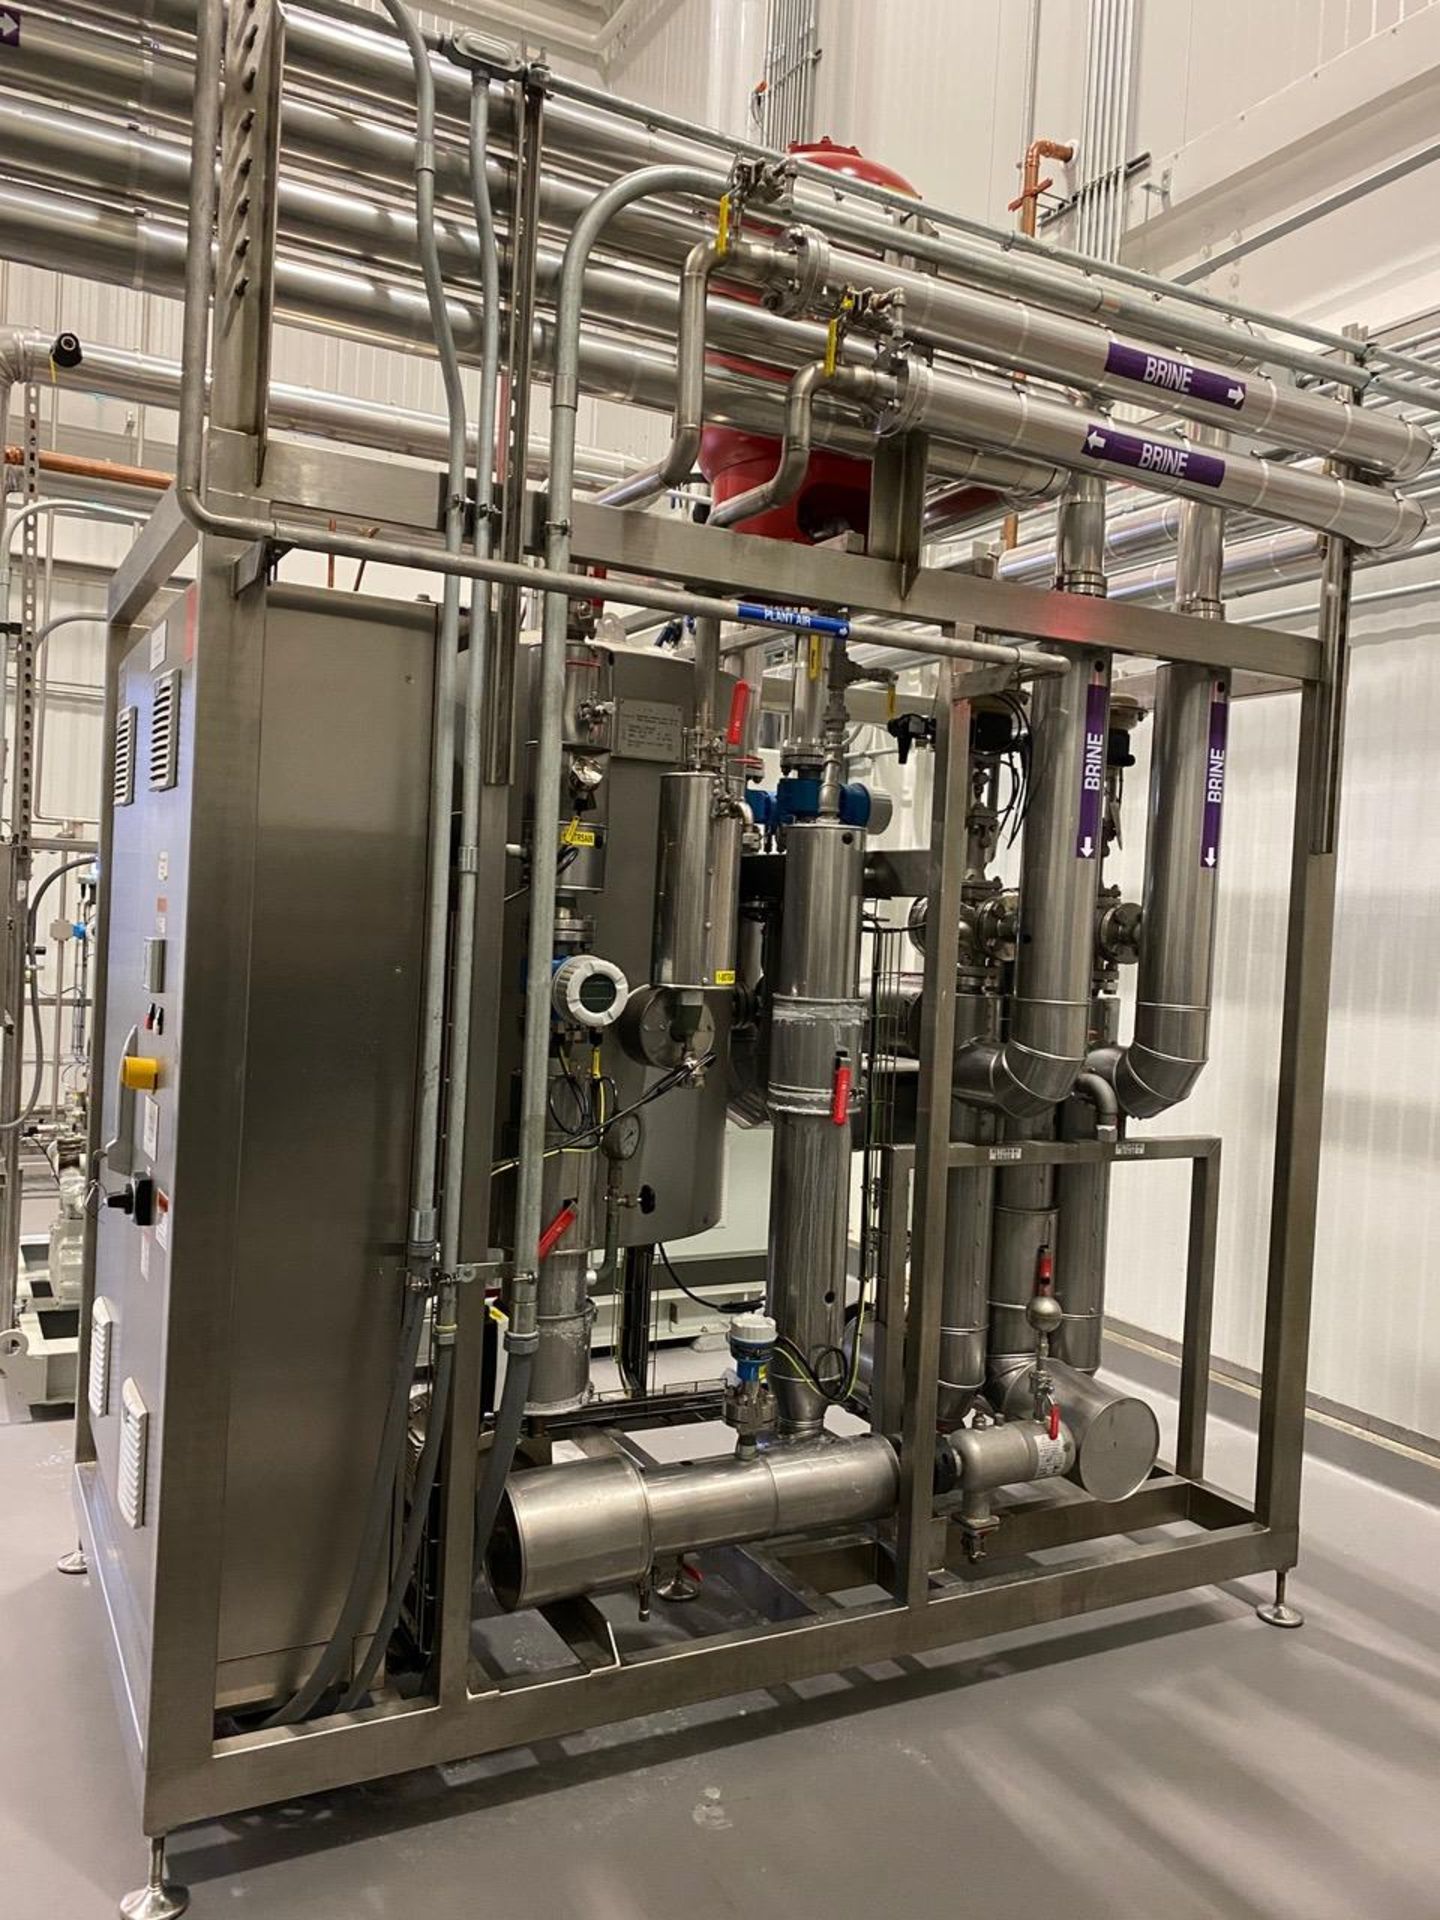 2018 Freeze Concentrate Brine Skid | Rig Fee: $1000